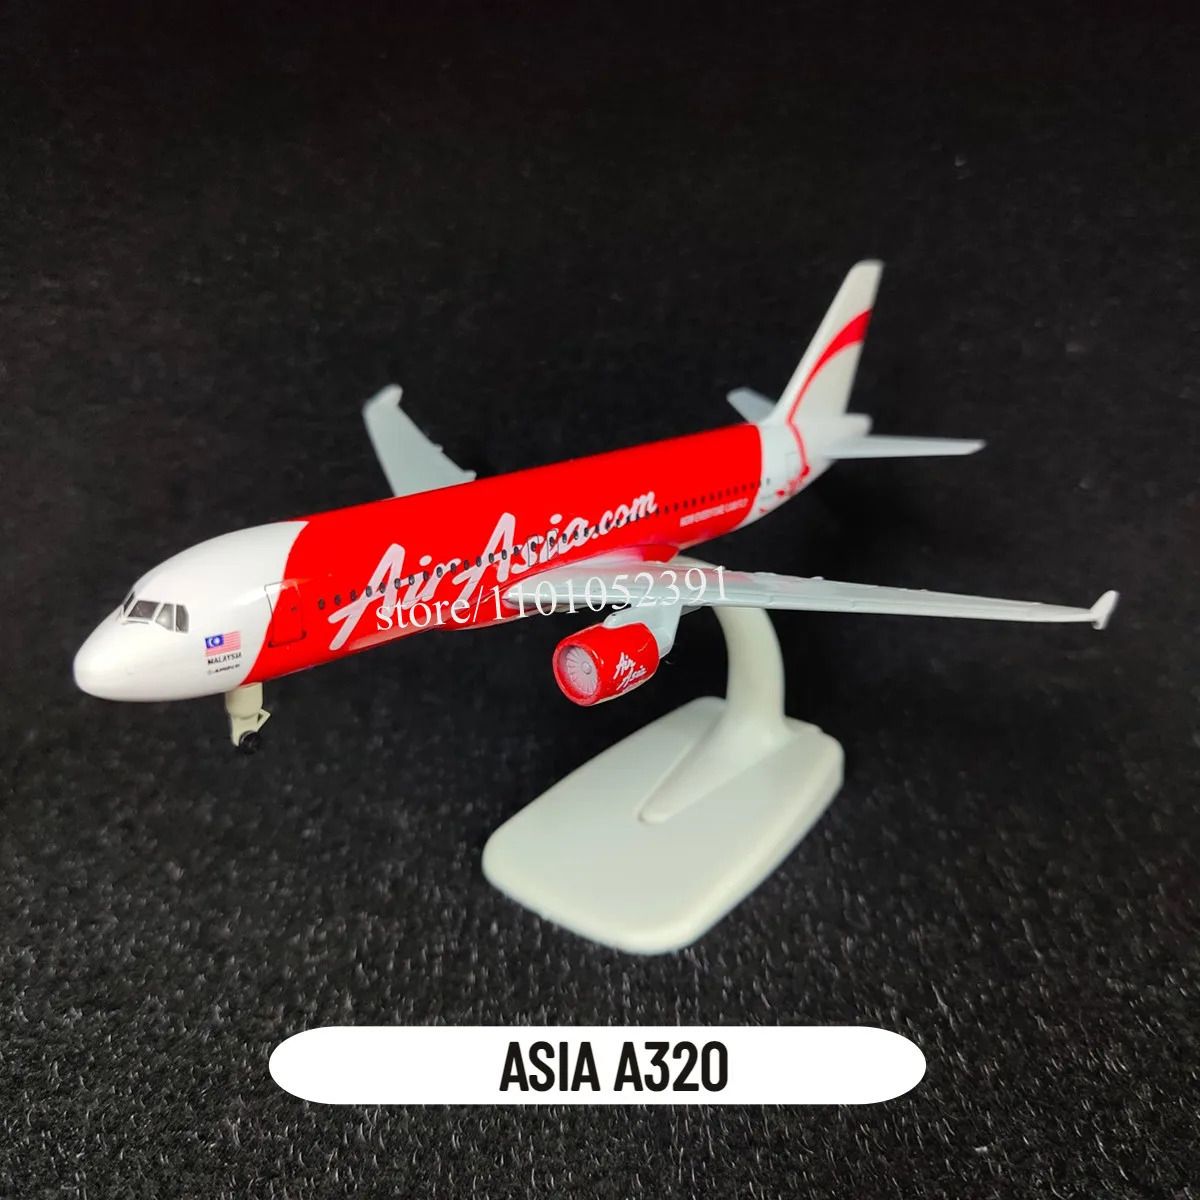 T31. Asia A320